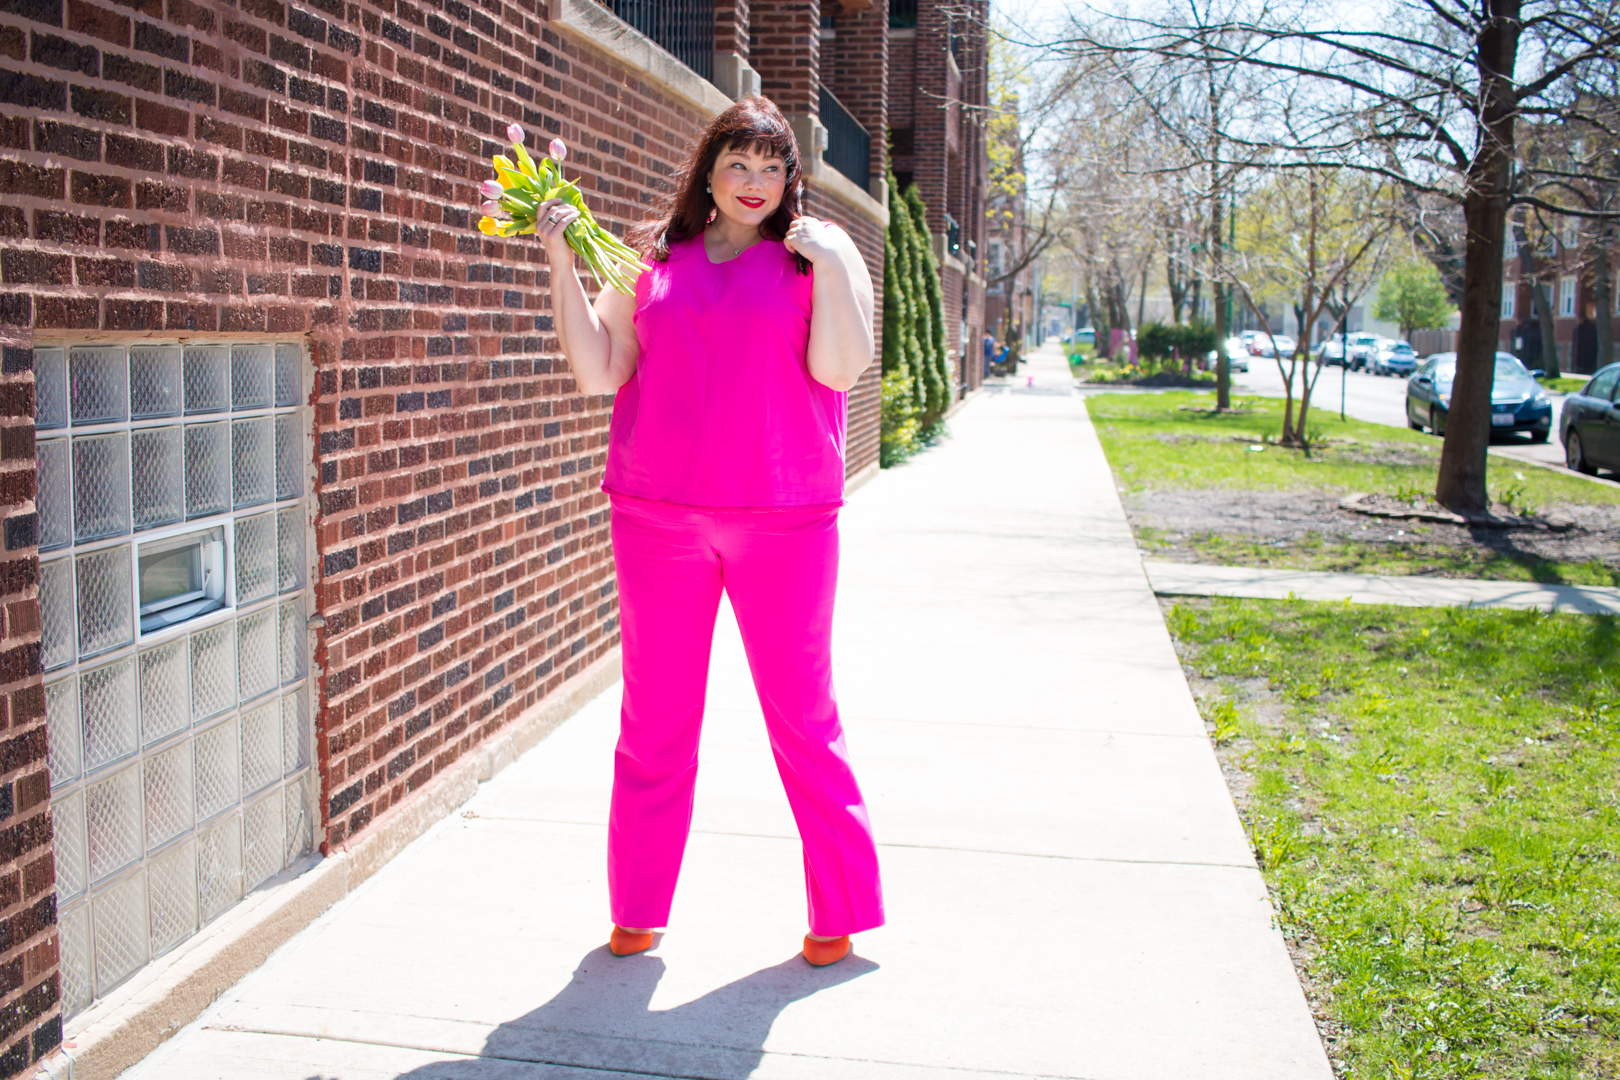 Plus Size Blogger wearing a pink suit from Victoria Beckham x Target collection